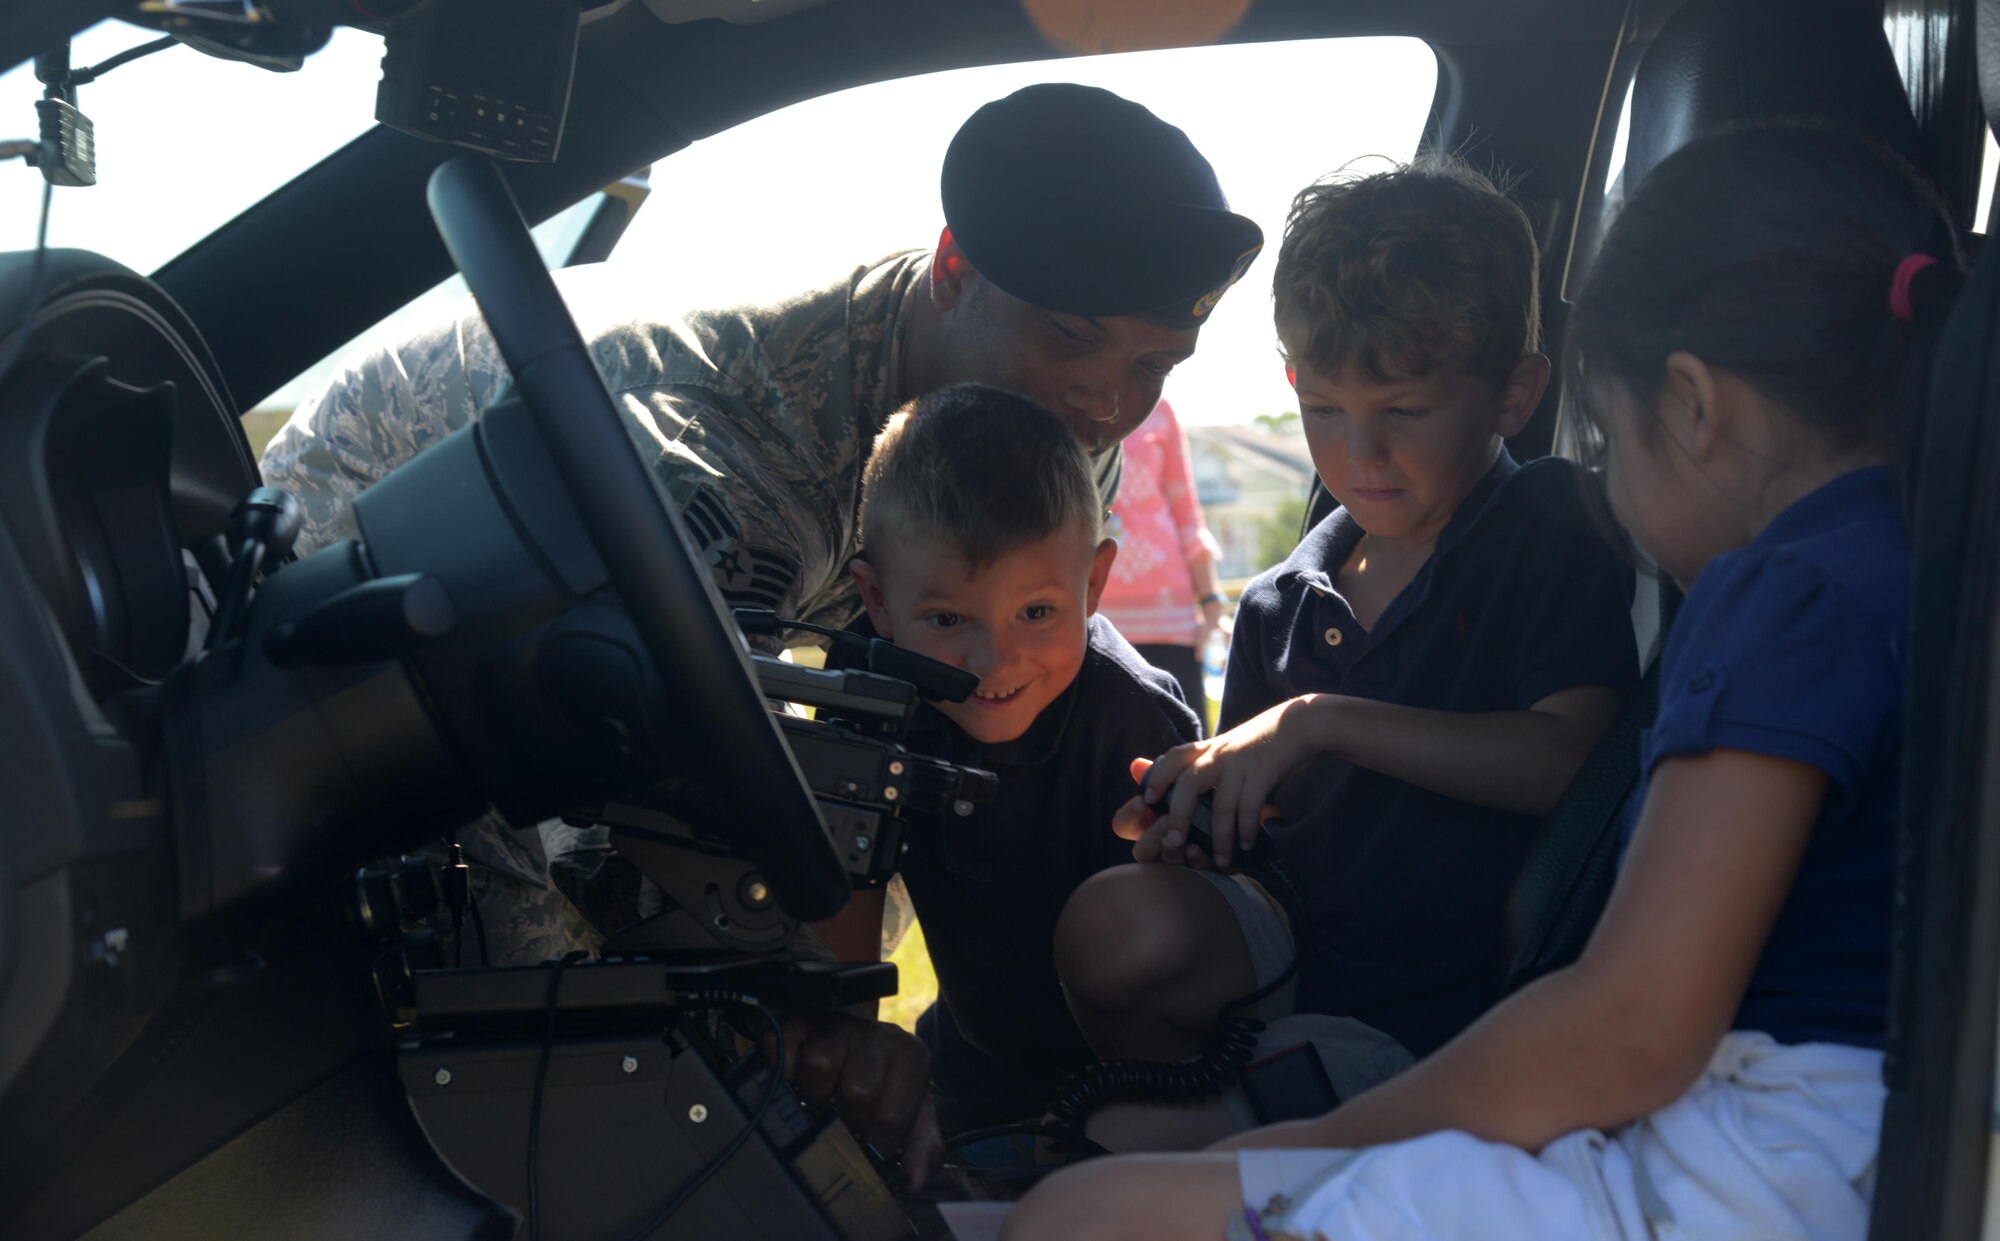 U.S. Air Force Tech. Sgt. Byron Taylor, NCO in charge of supply assigned to the 6th Security Forces Squadron (SFS), shows students from Tinker Elementary School how to turn on his police cars sirens at MacDill Air Force Base, Fla., May 16, 2017. The 6th SFS setup different displays and taught students weapon safety to celebrate National Police Week, May 15-21, 2017. (U.S. Air Force photo by Senior Airman Tori Long)